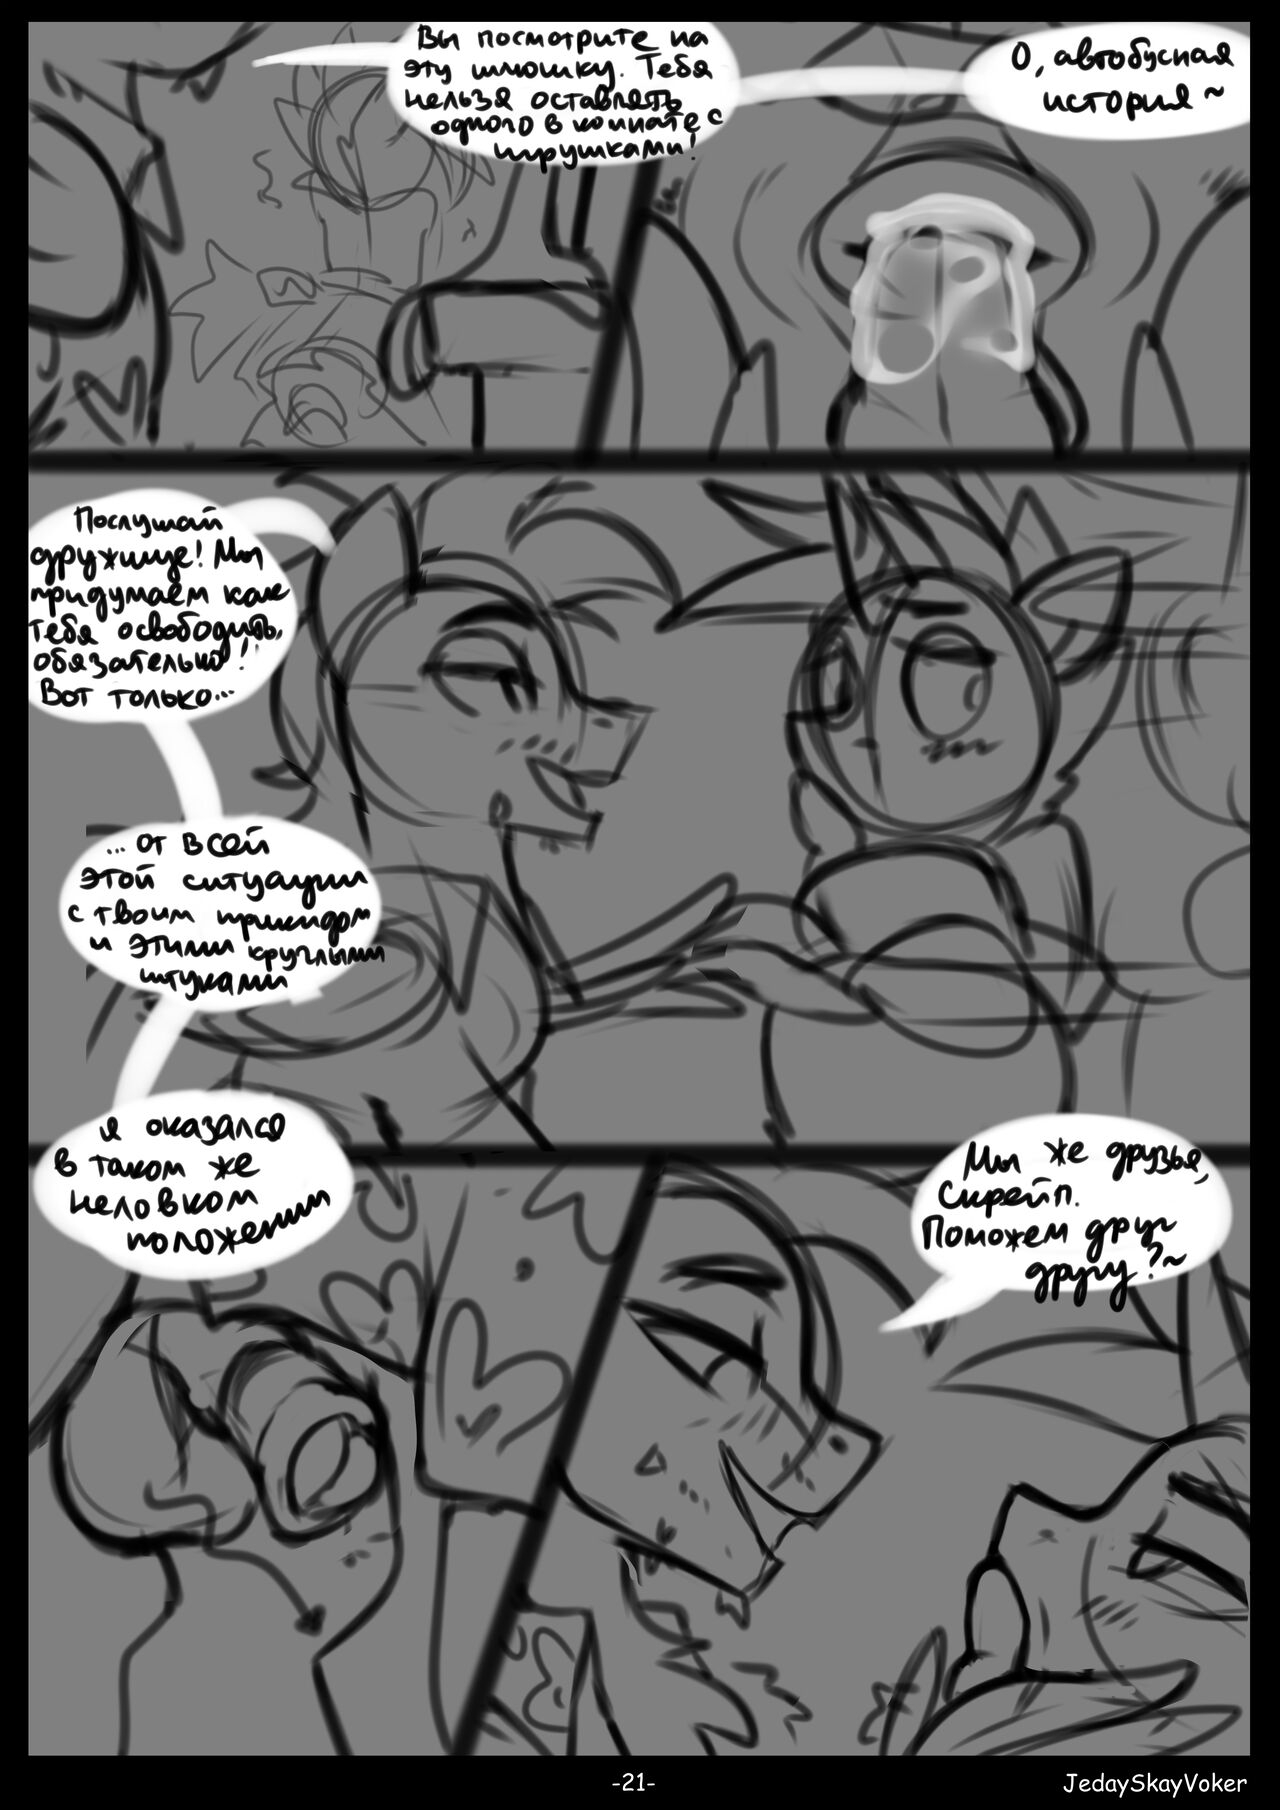 [JedaySkayVoker] Play the Record, ch. 1-3 (My Little Pony: Friendship is Magic) [+Sketches][Ongoing][Russian] 42